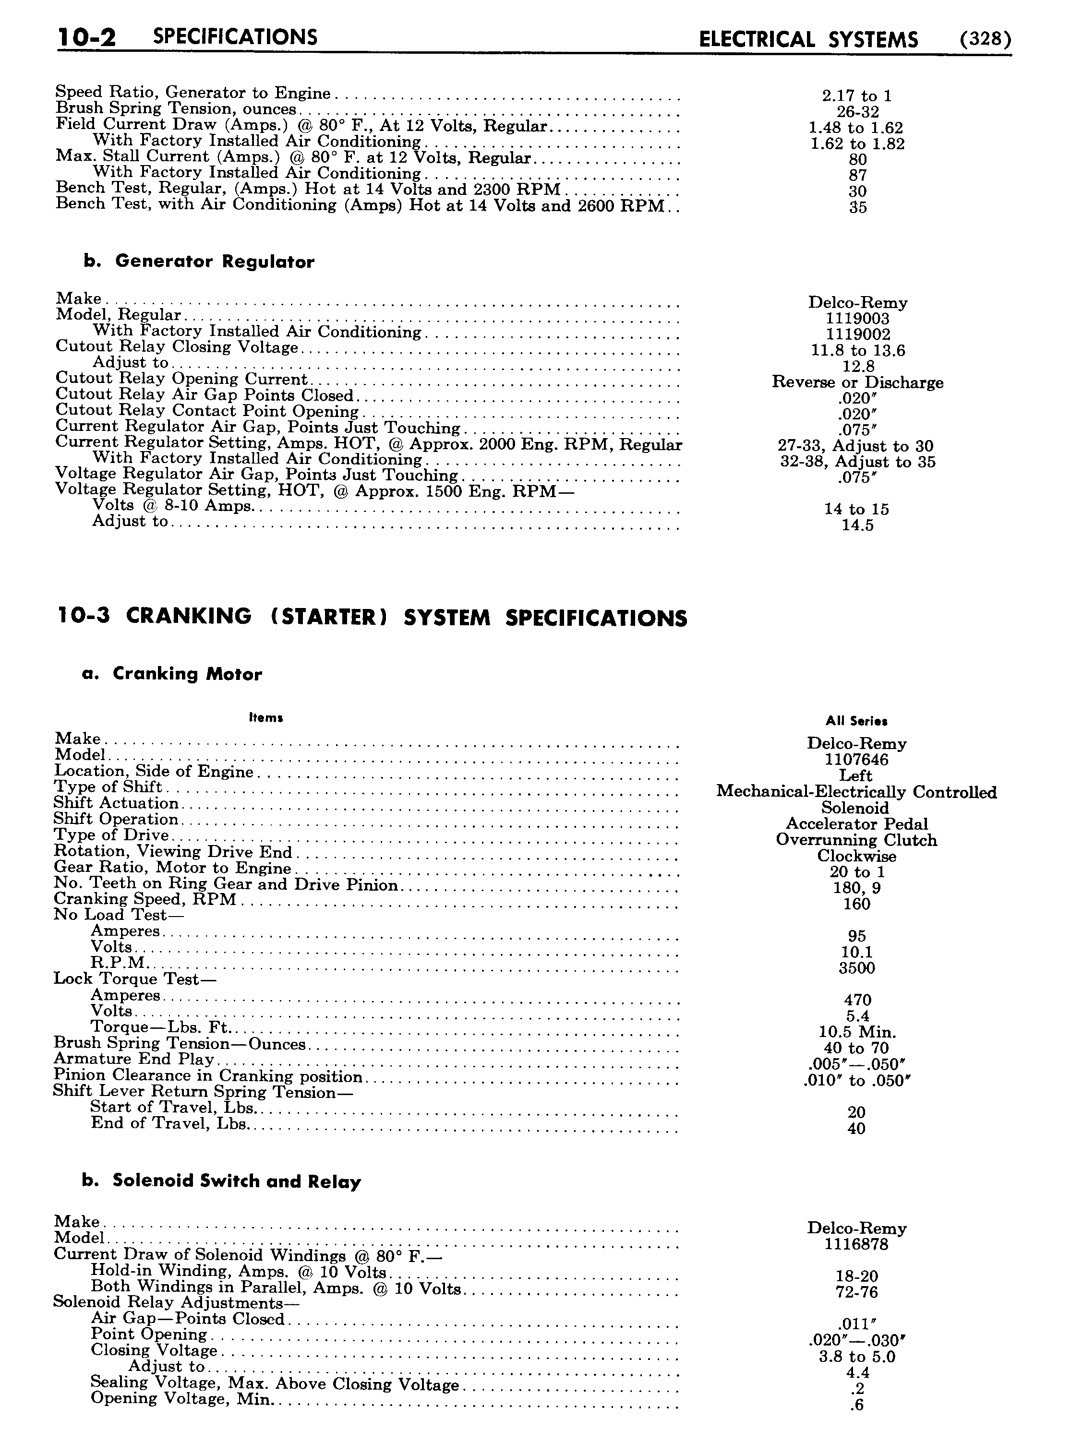 n_11 1956 Buick Shop Manual - Electrical Systems-002-002.jpg